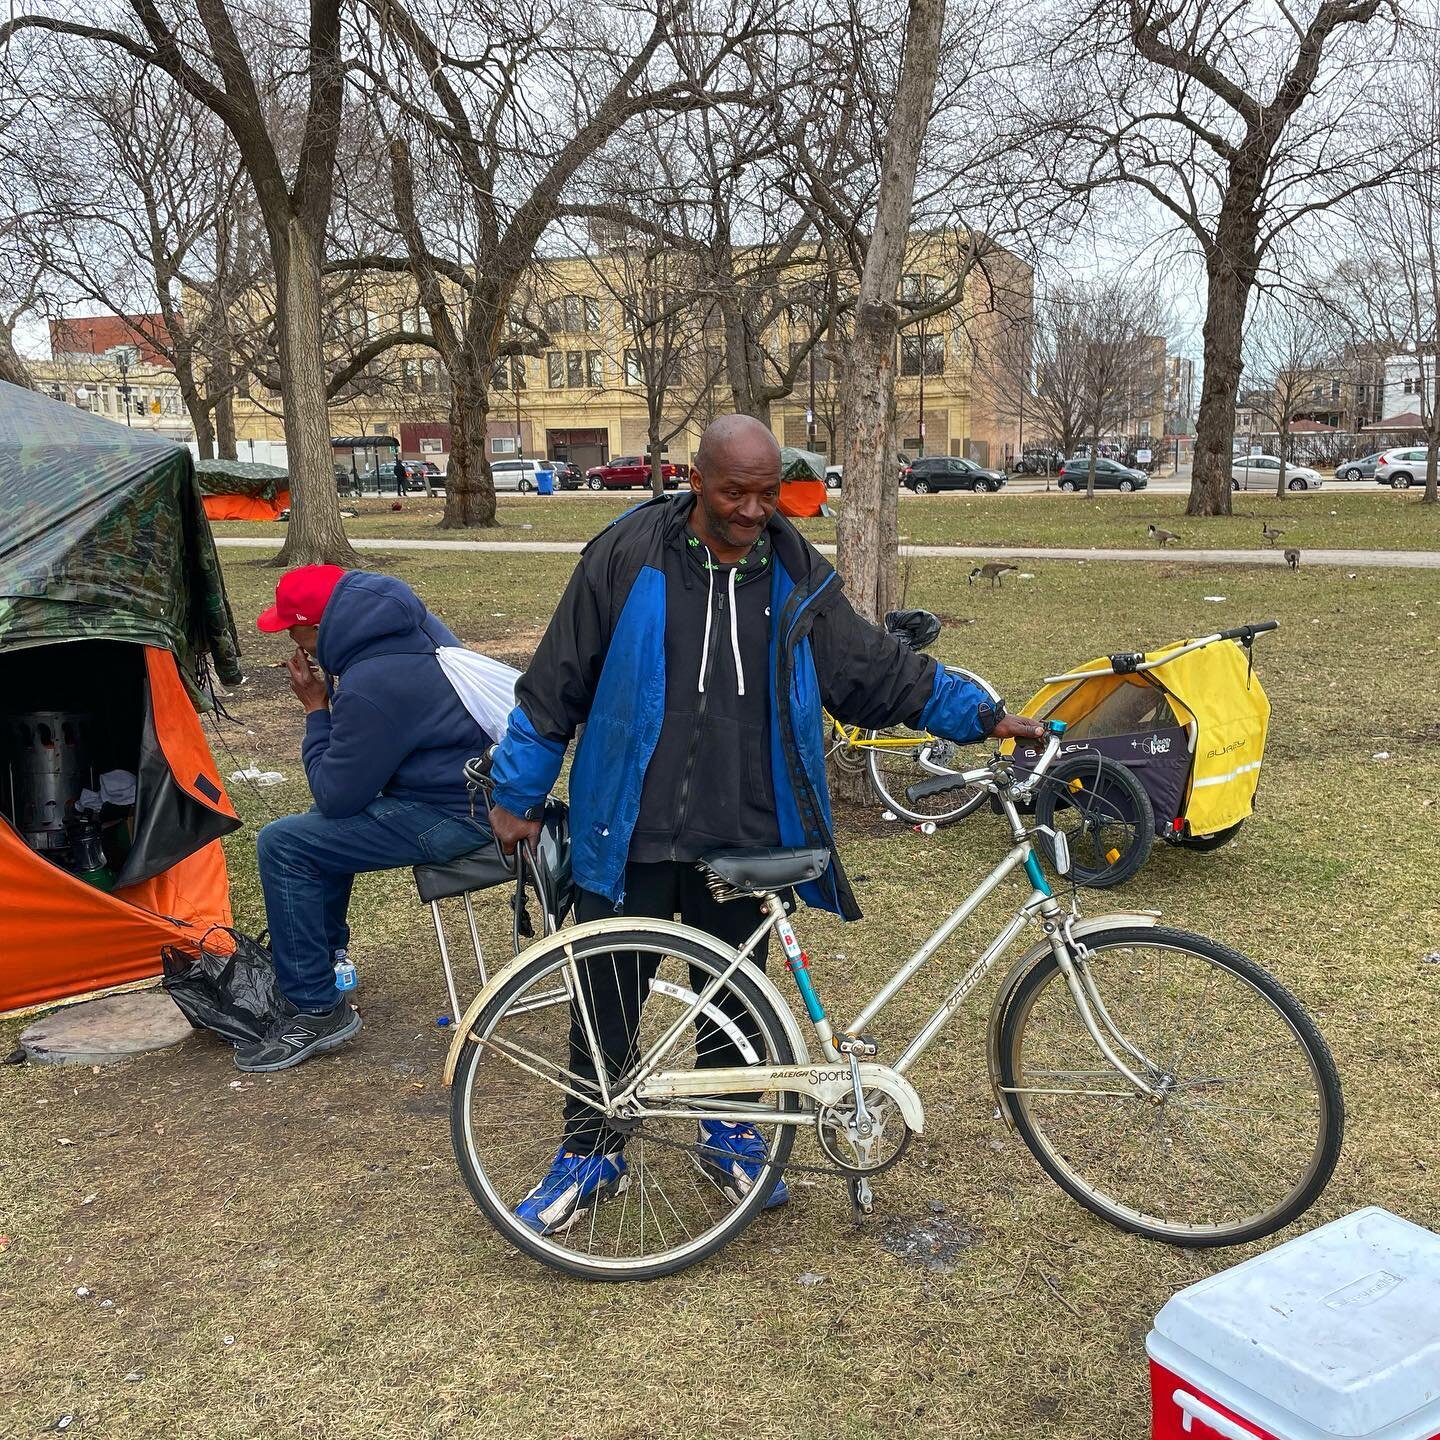 This is Alan. Last week he asked if we could get him a small propane tank to heat his tent for the night - he said he would pay for it but it was just too far to get (2 miles away). Today, Alan&rsquo;s got two wheels and is excited to burn some rubbe